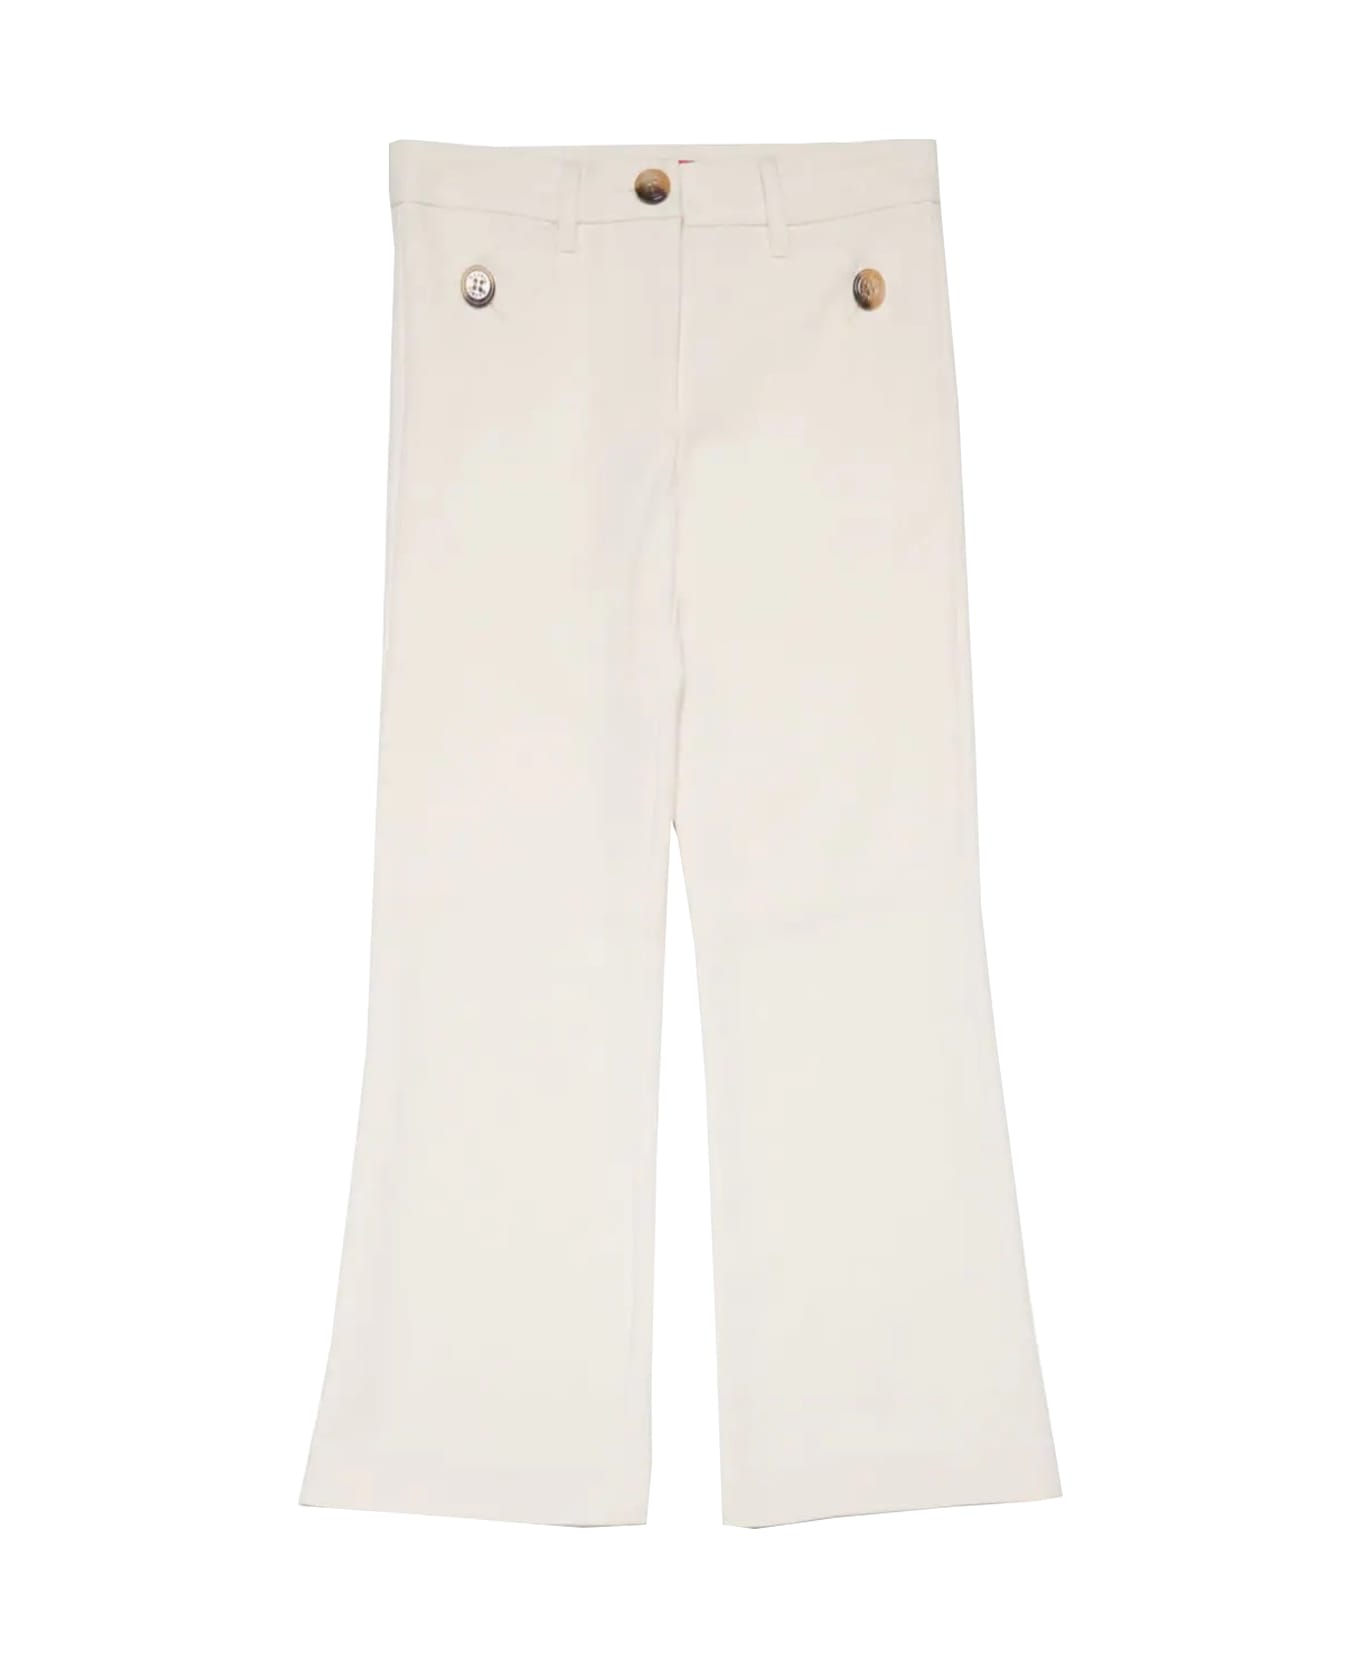 Max&Co. Stretch Viscose Blend Pants - White ボトムス